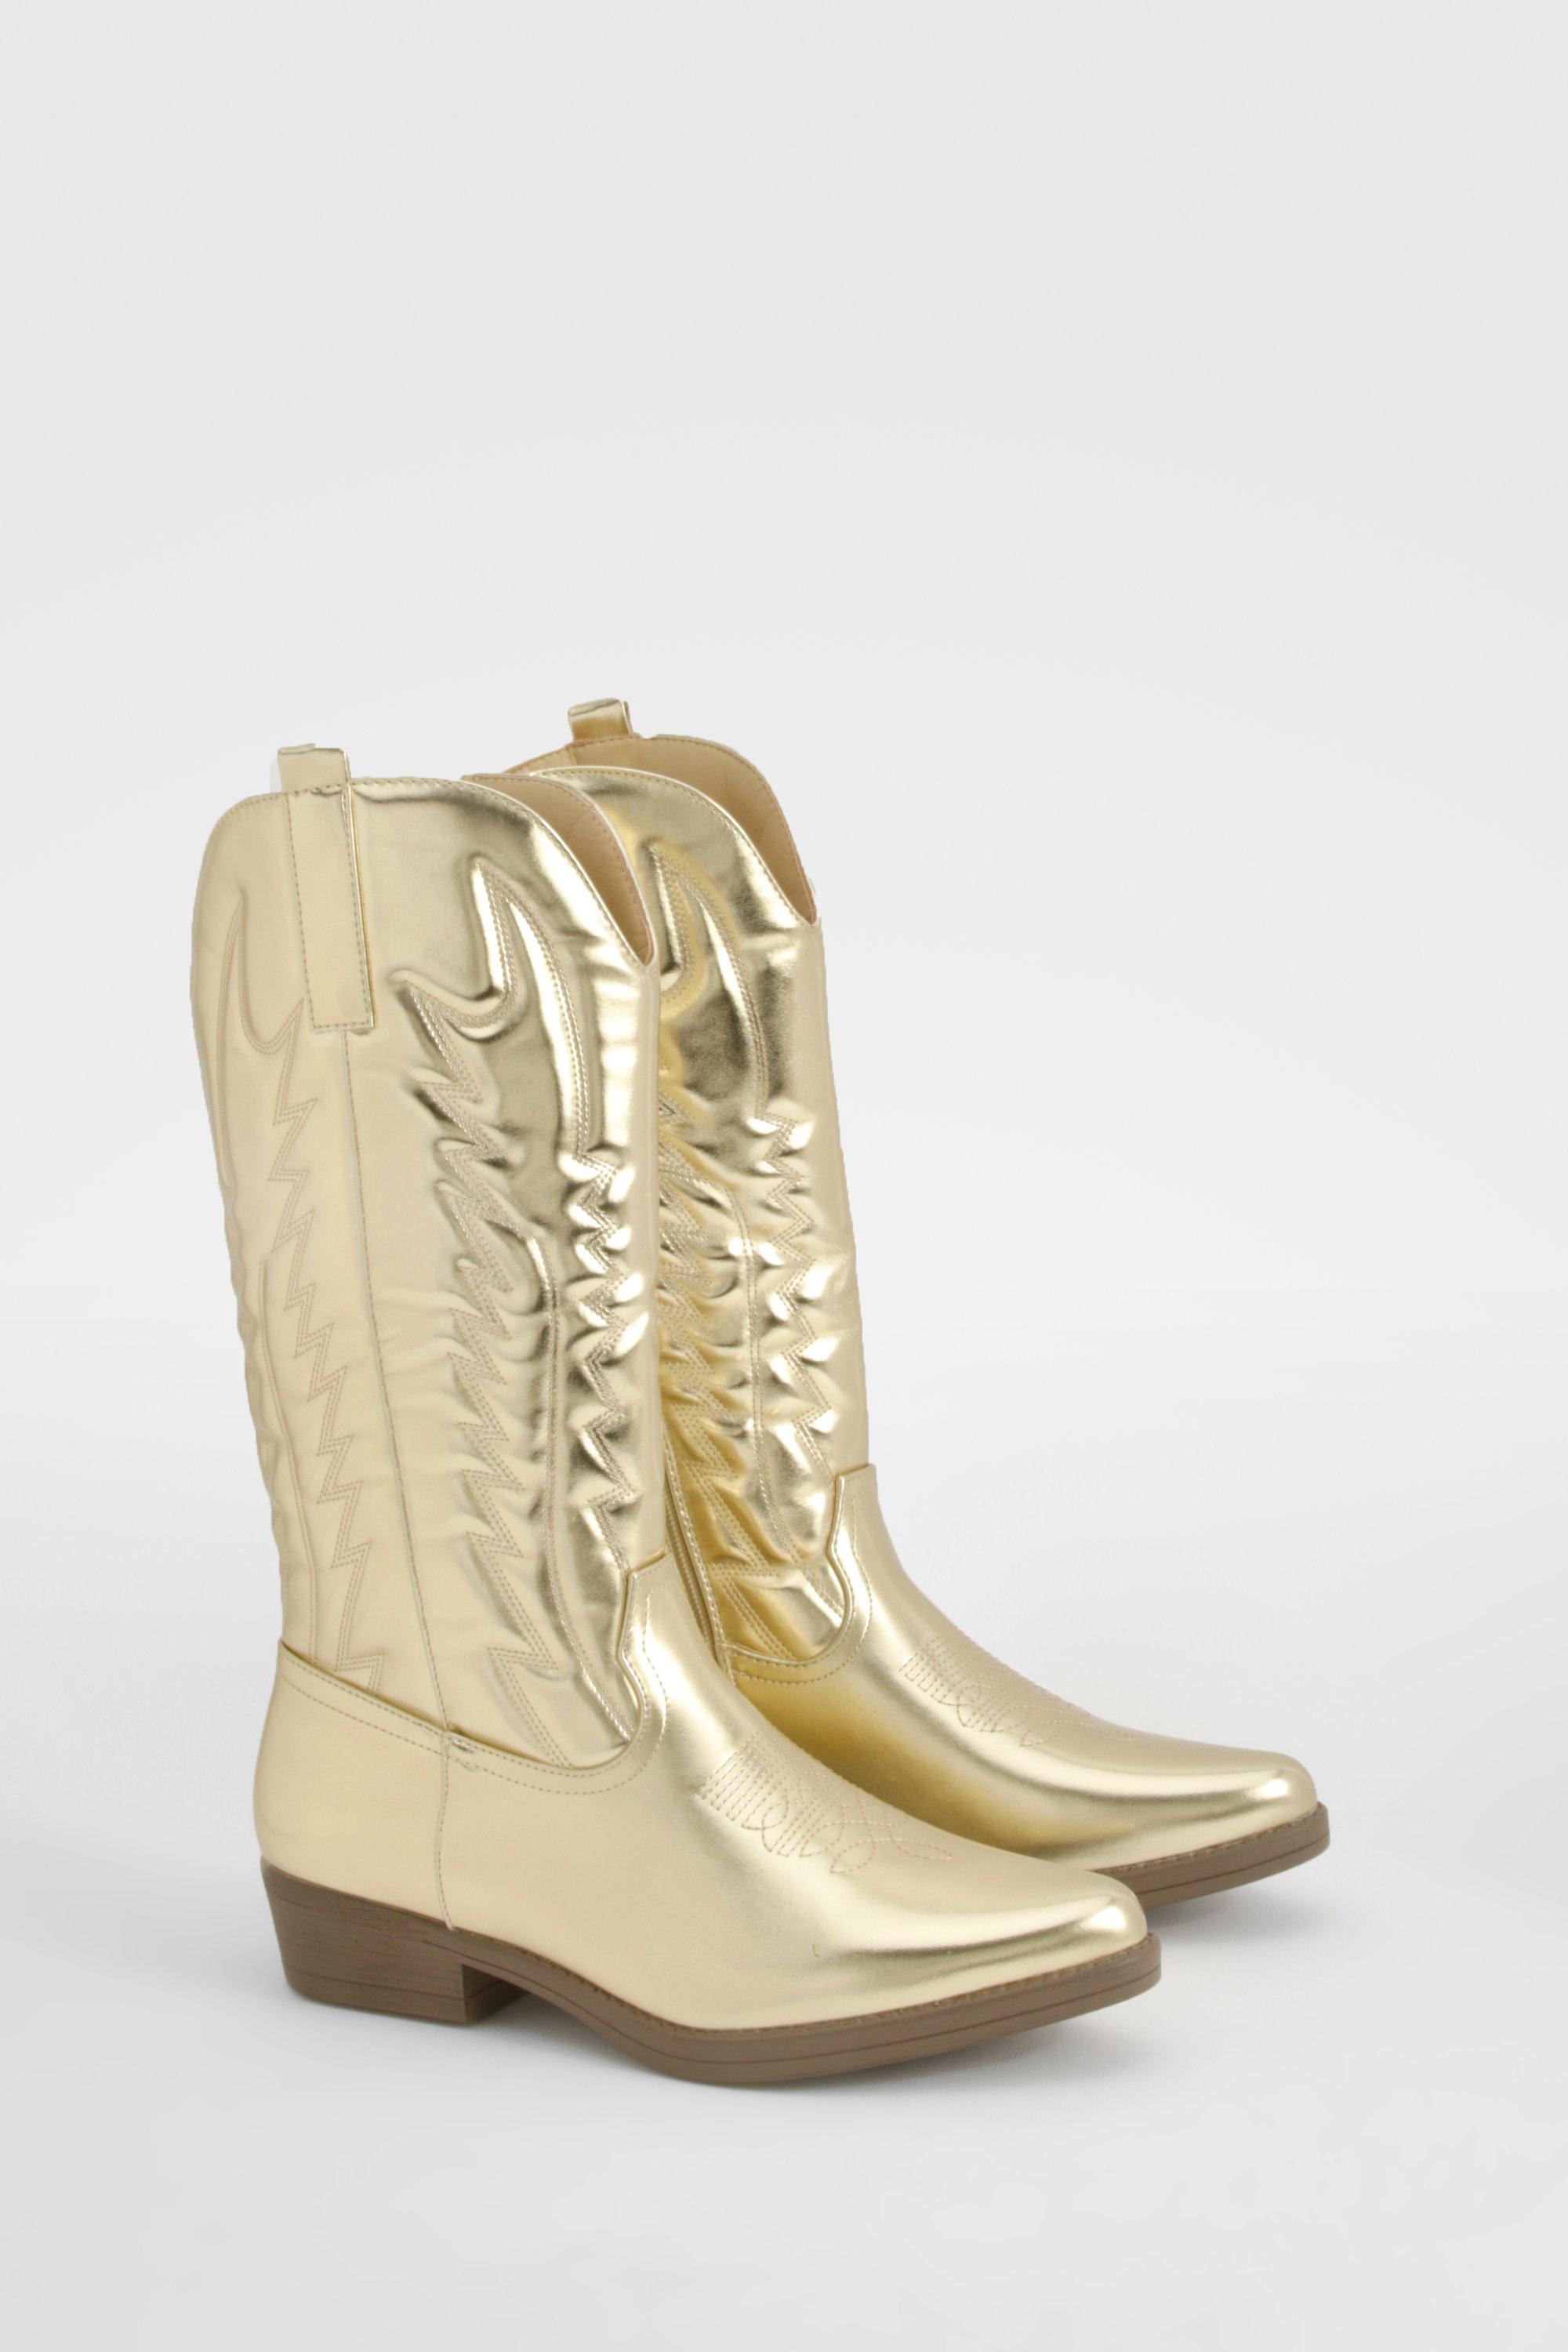 Boohoo Metallic Embroidered Detail Western Cowboy Boots, Gold